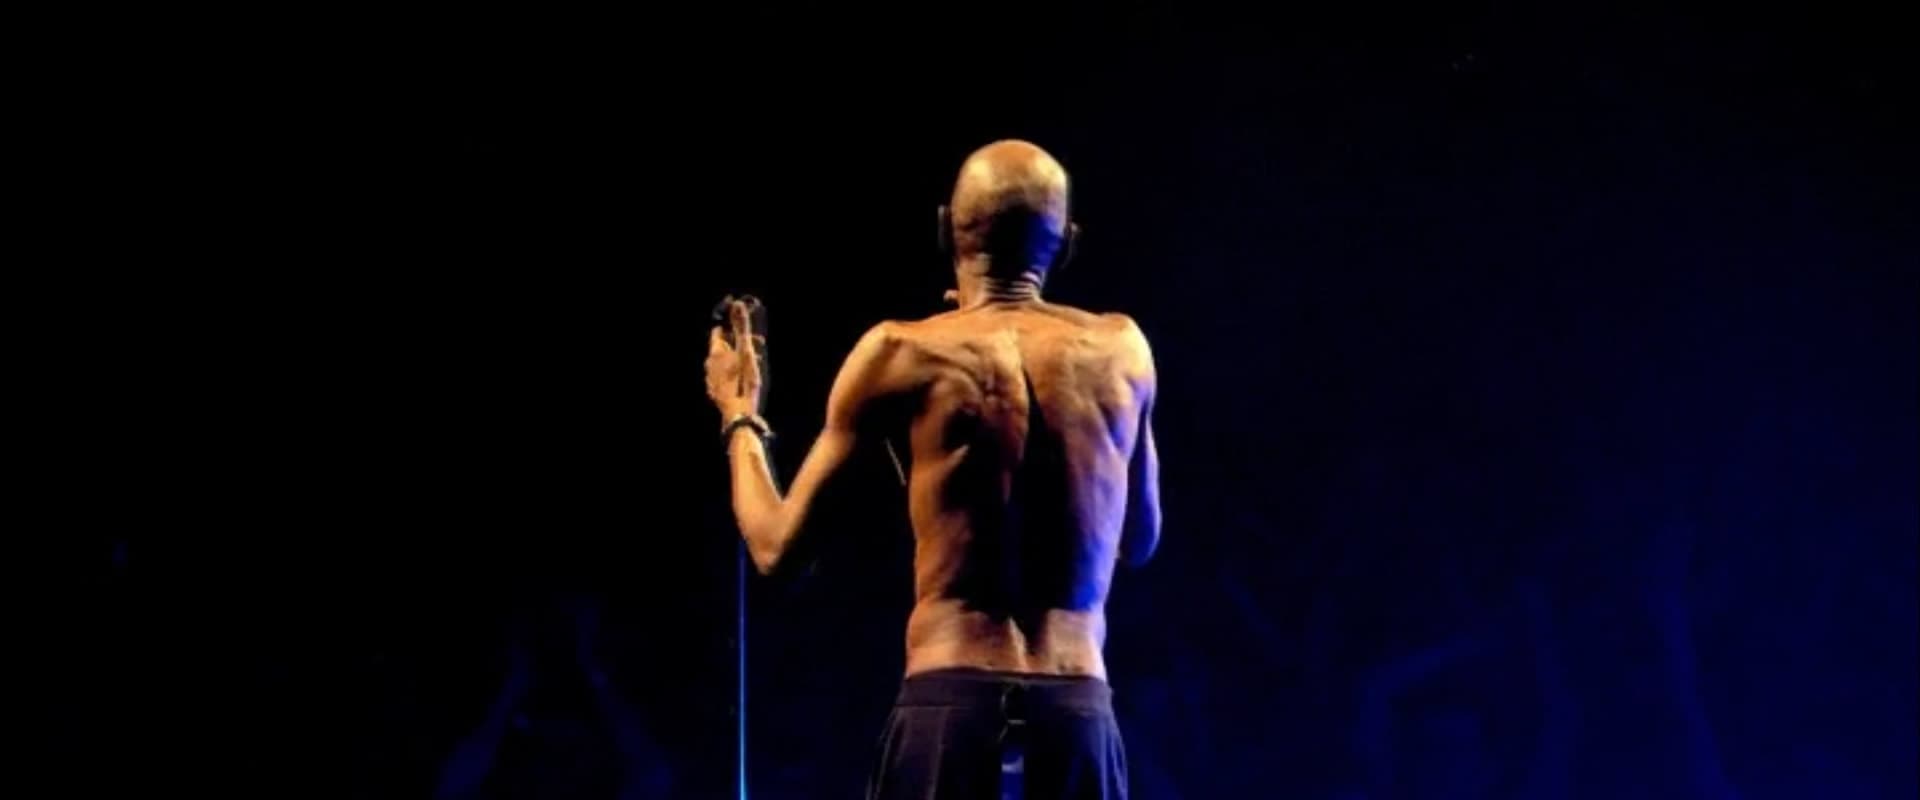 Faithless: Passing the Baton - Live From Brixton